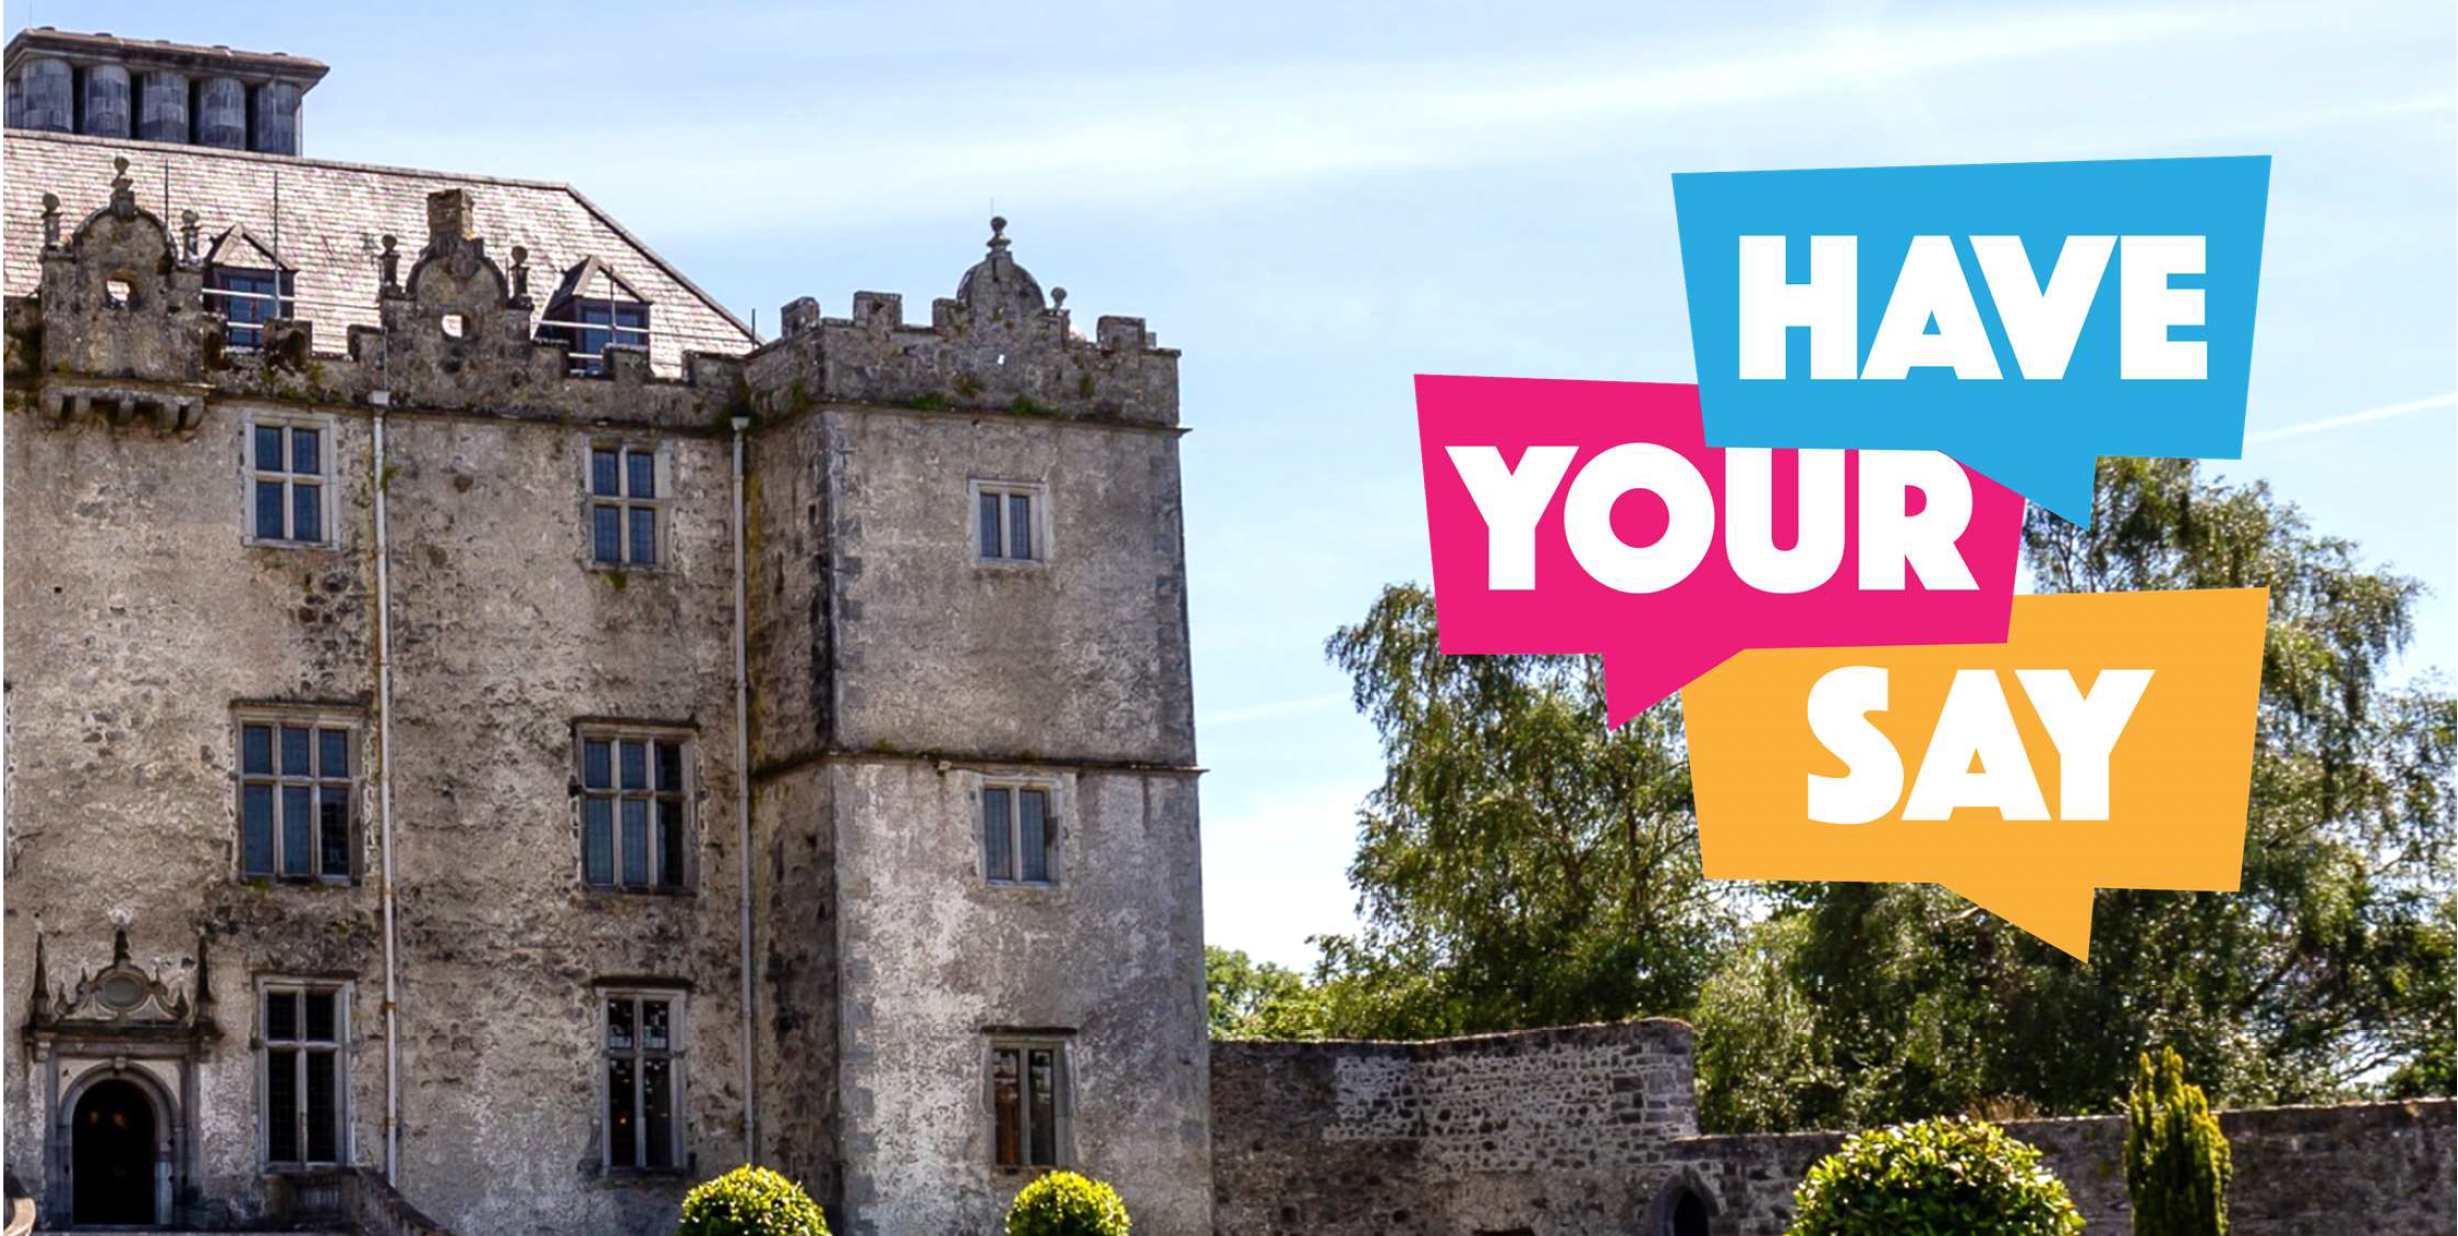 Portumna Have your Say banner image